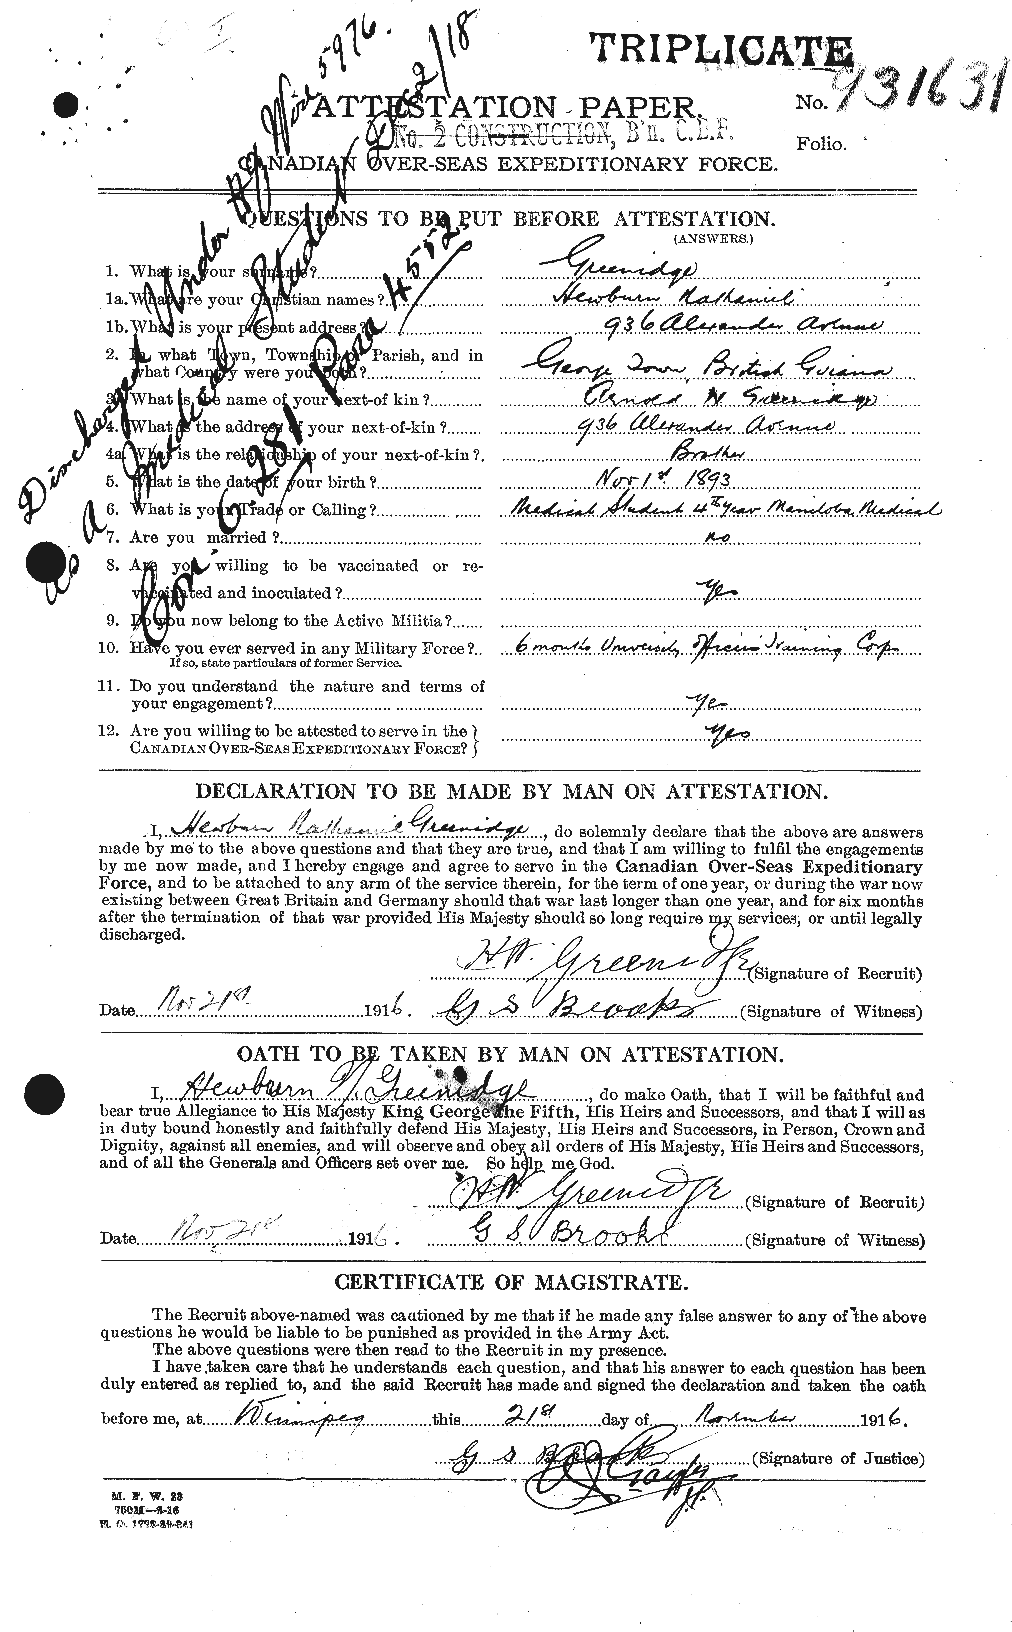 Personnel Records of the First World War - CEF 364178a